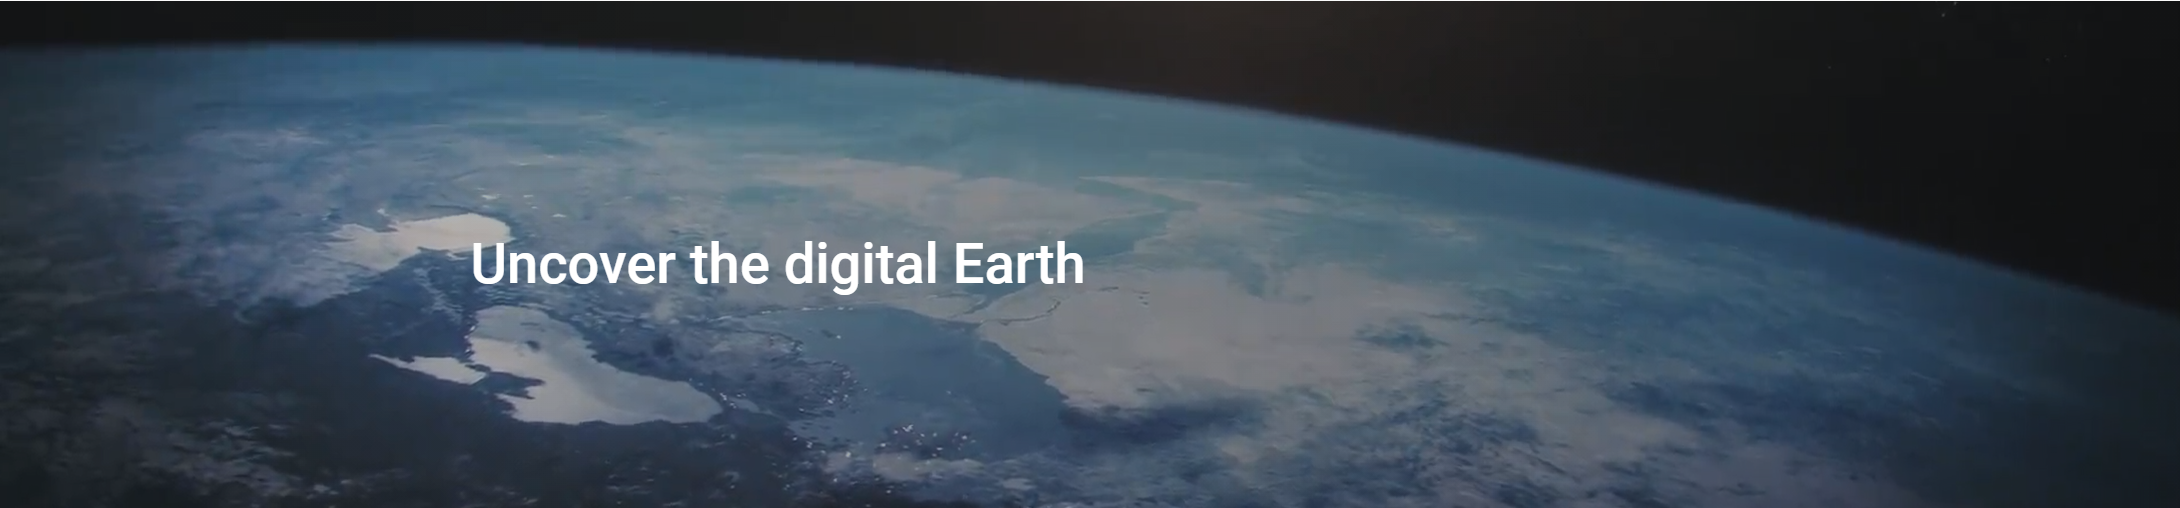 uncover the digital earth